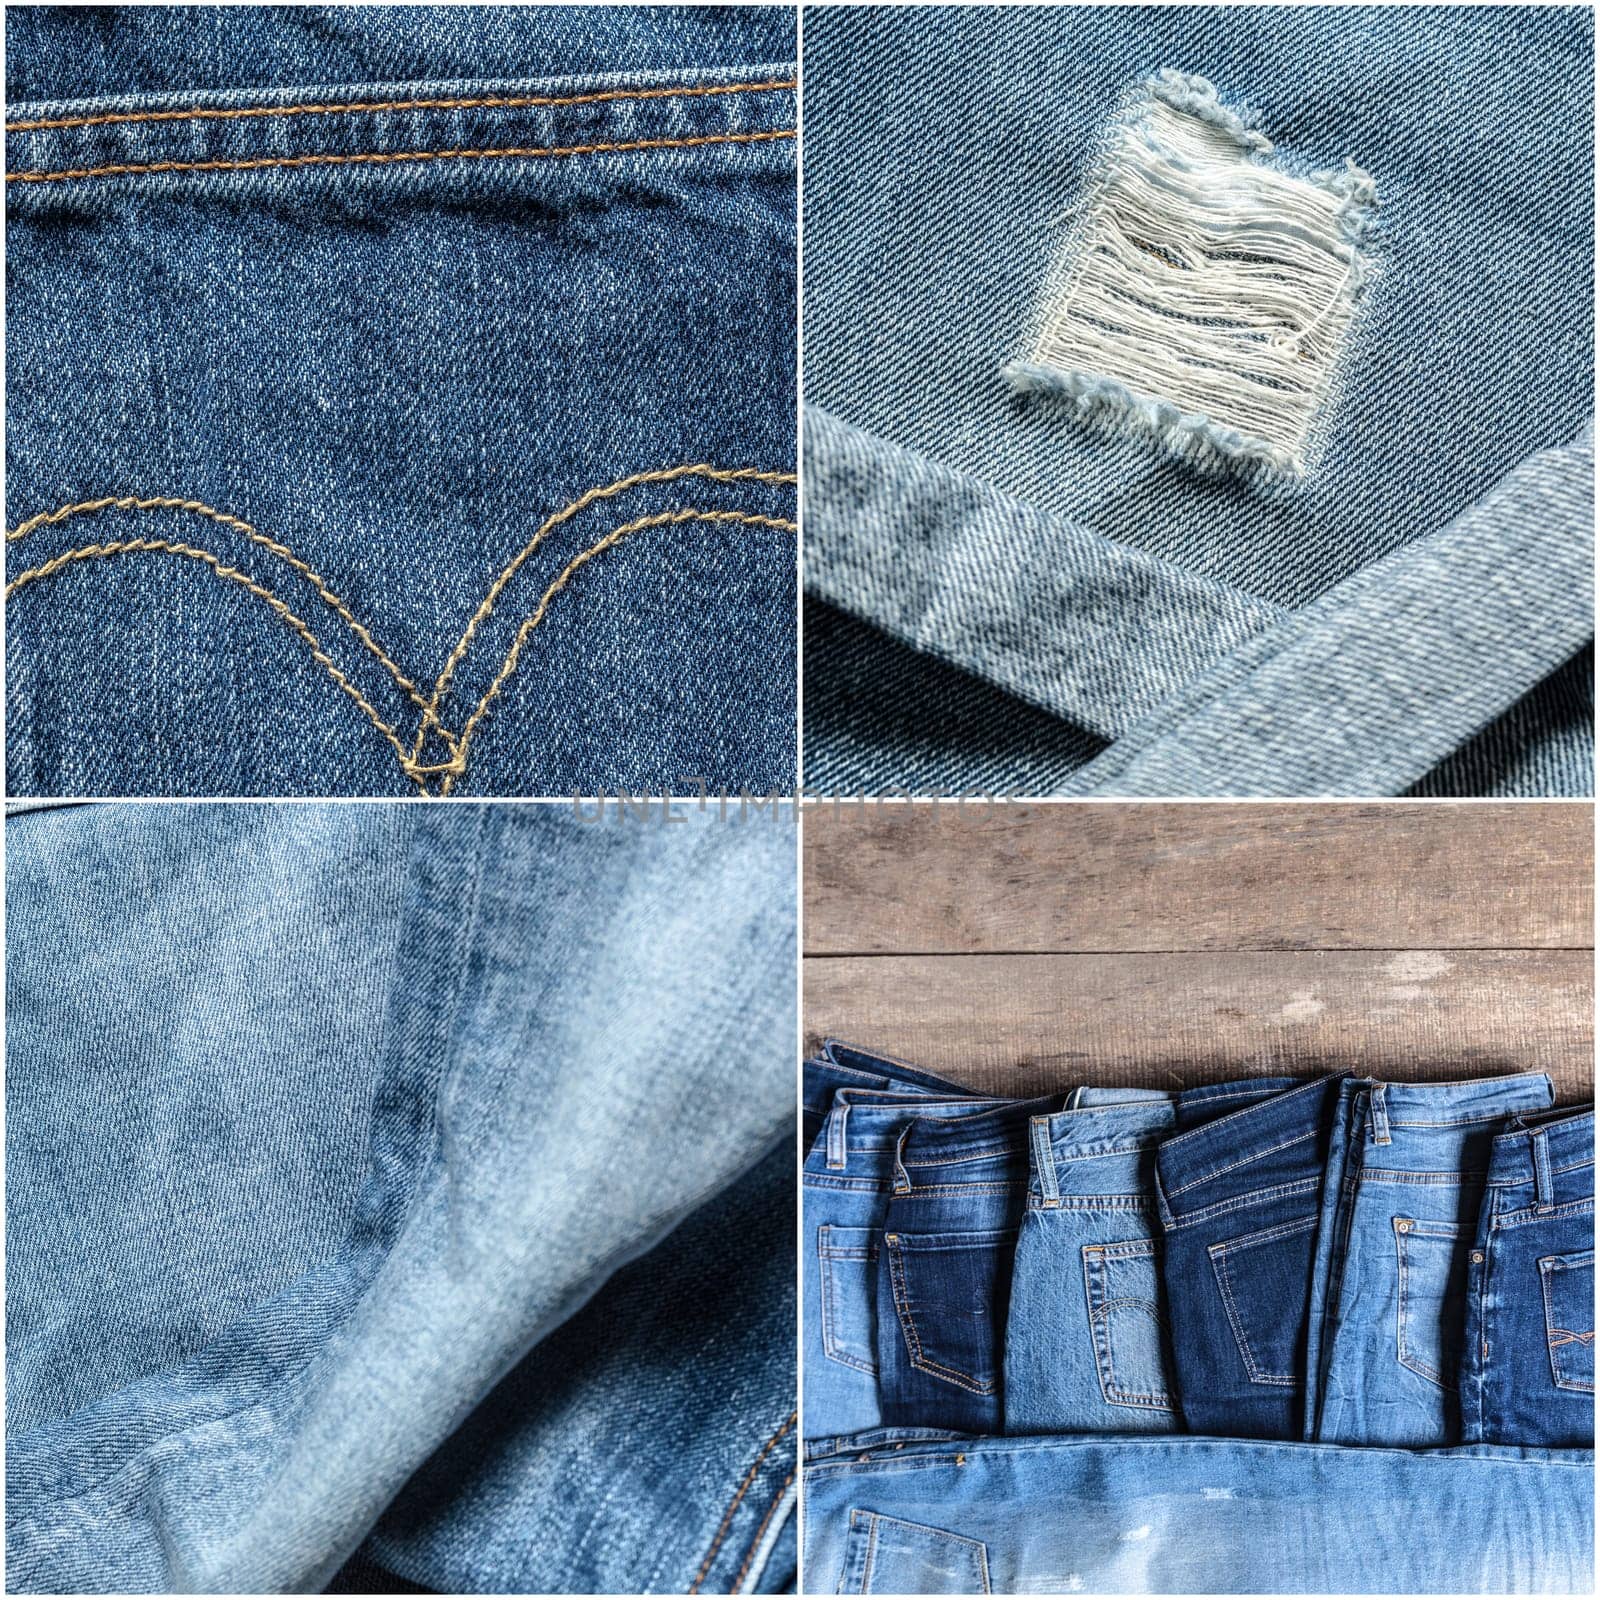 Jeans background by Fabrikasimf